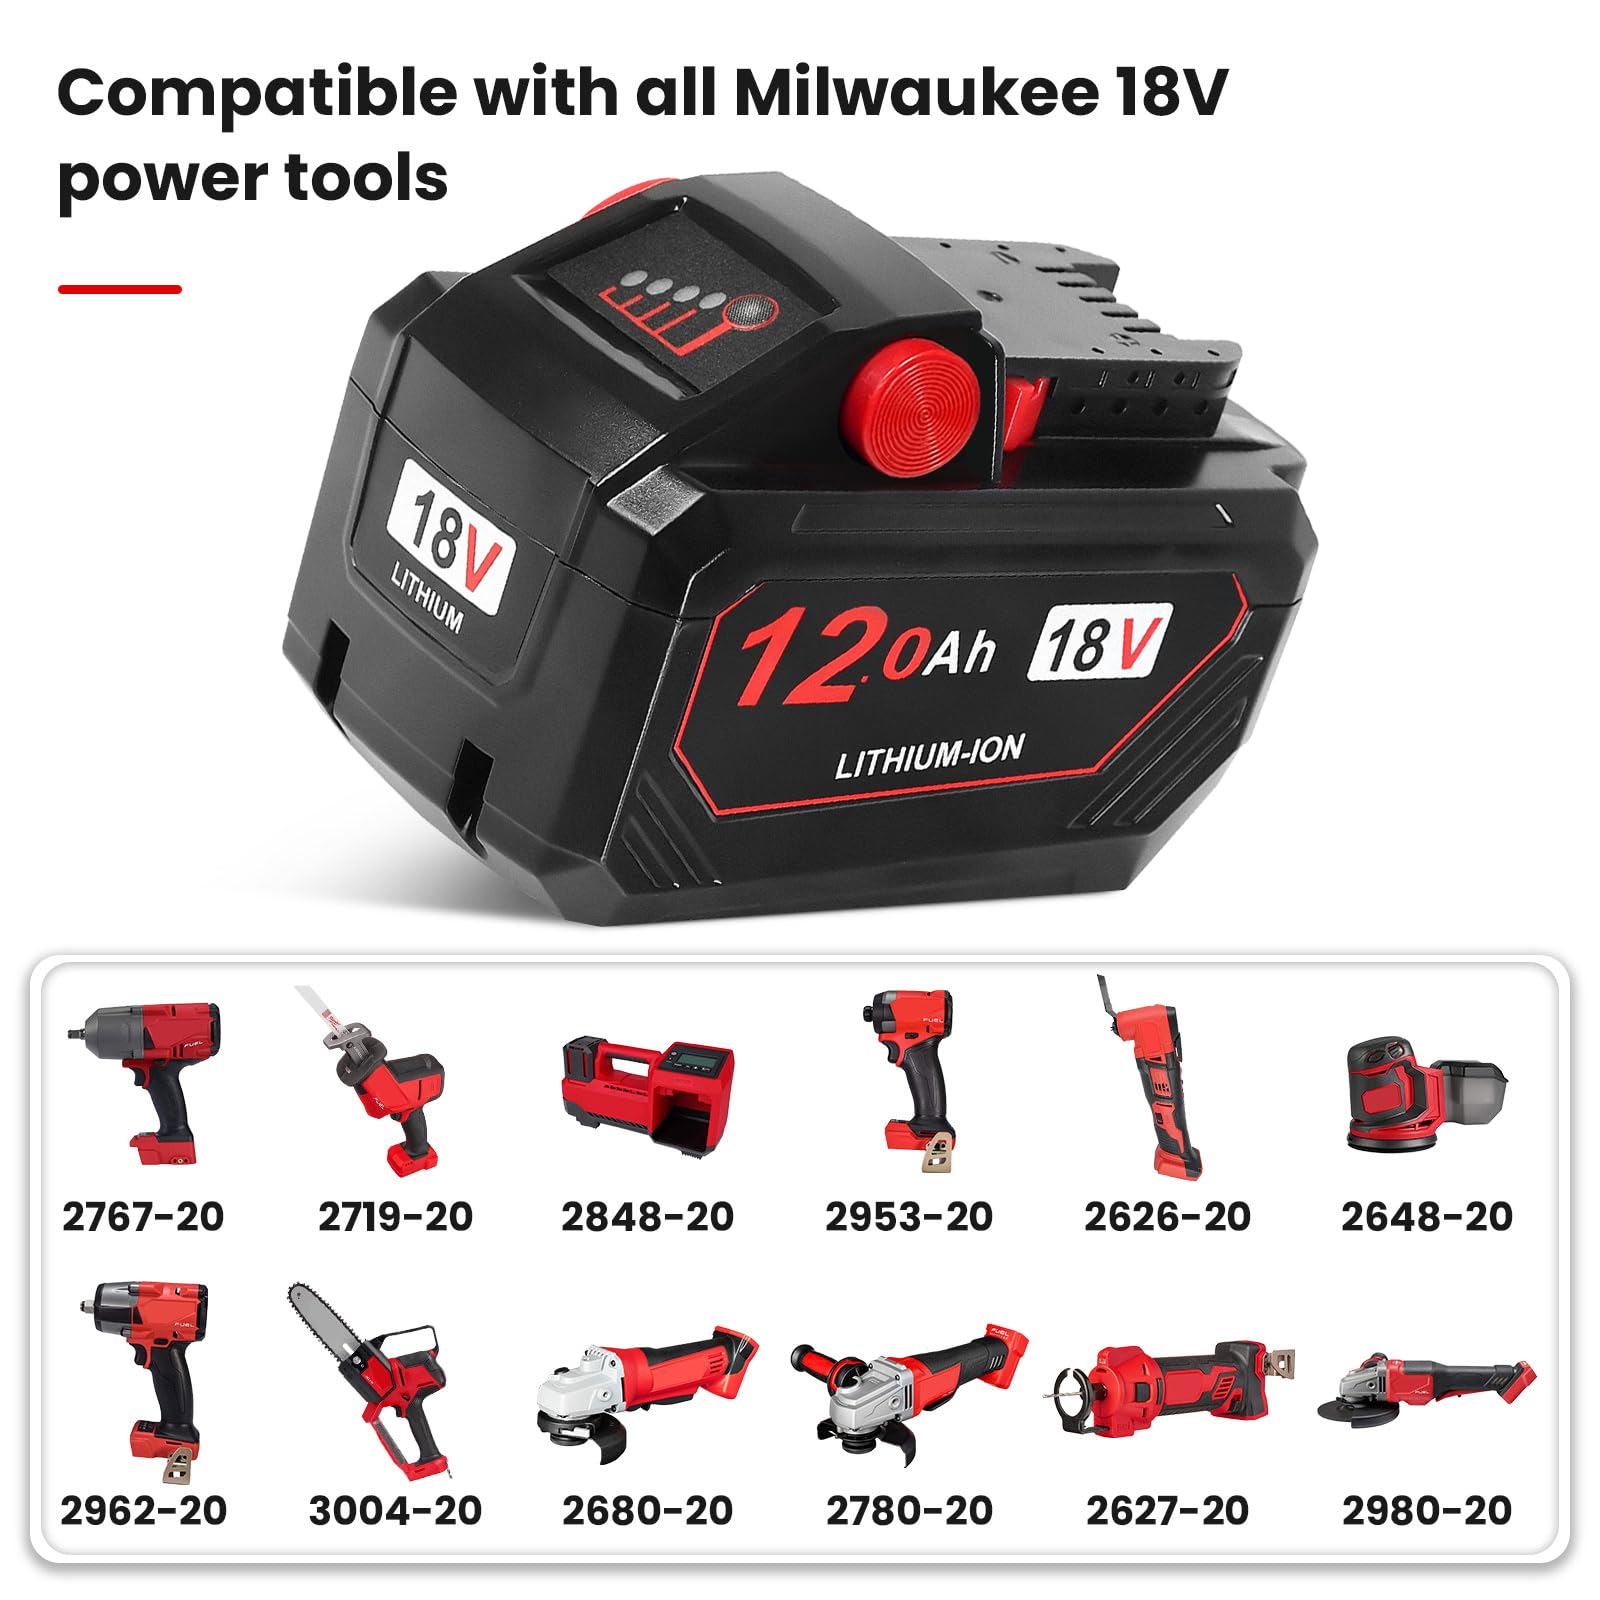 Lomrige 18V Battery Replacement for Milwaukee M18 Battery 12.0Ah 48-11-1850 48-11-1840 48-11-1815 48-11-1820 48-11-1852 48-11-1828 48-11-1822 Cordless Power Tool